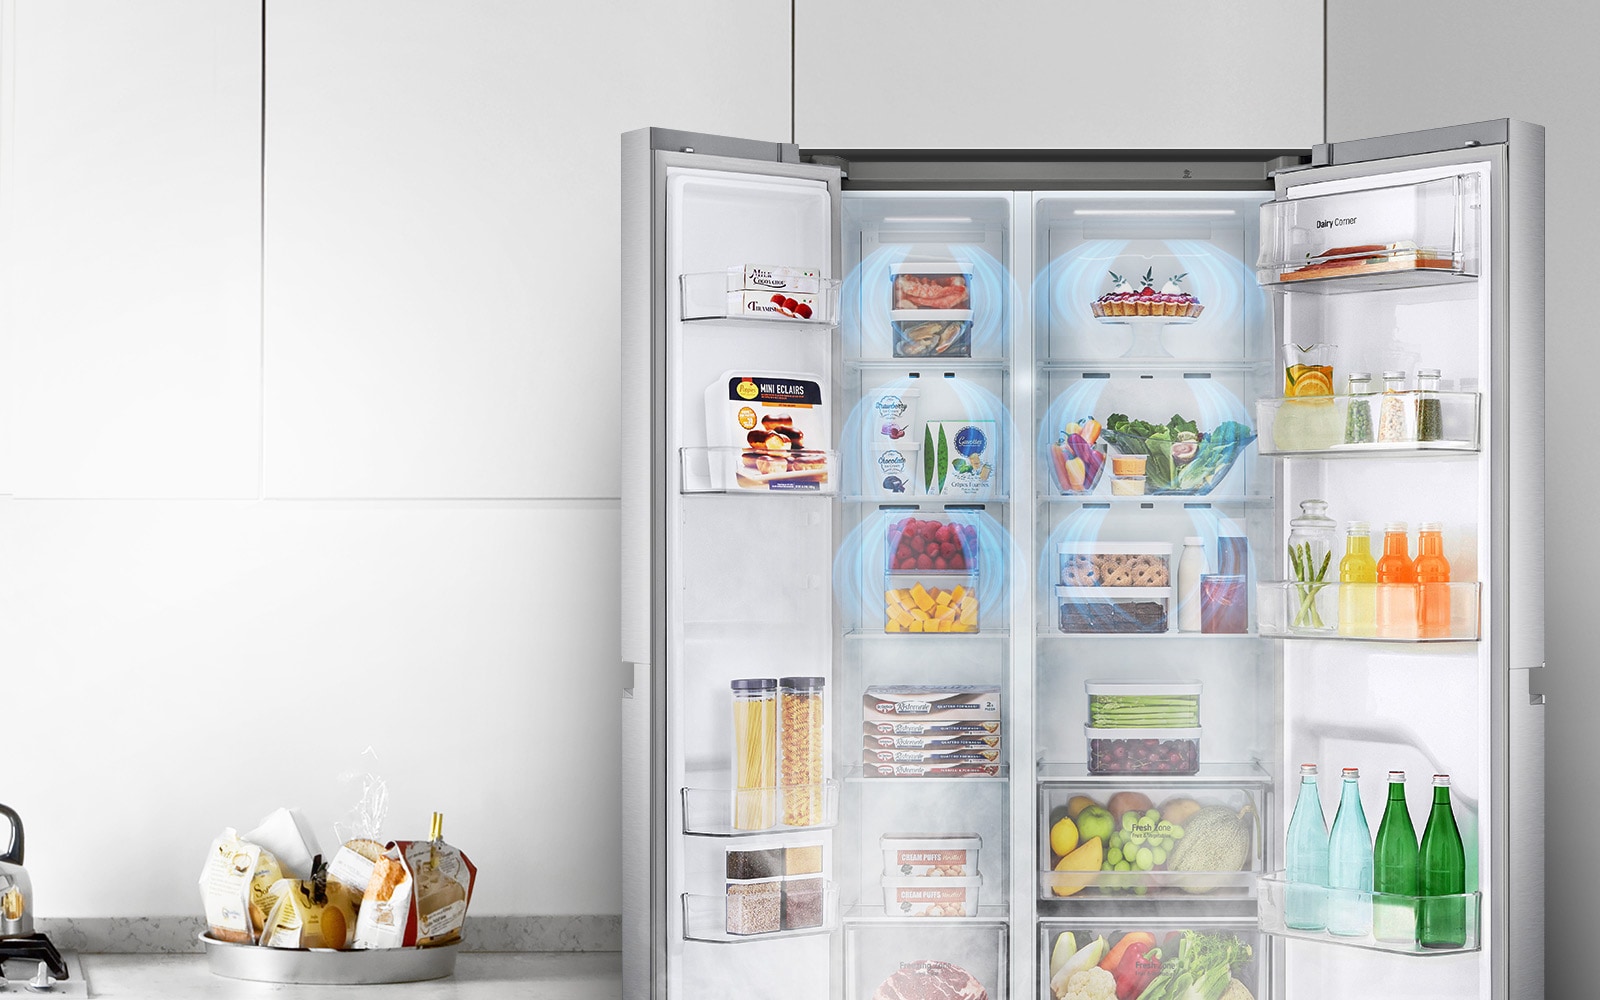 A front view of the refrigerator with the two front doors wide open showing a full refrigerator. Blue clouds of fog are shown falling over all products.